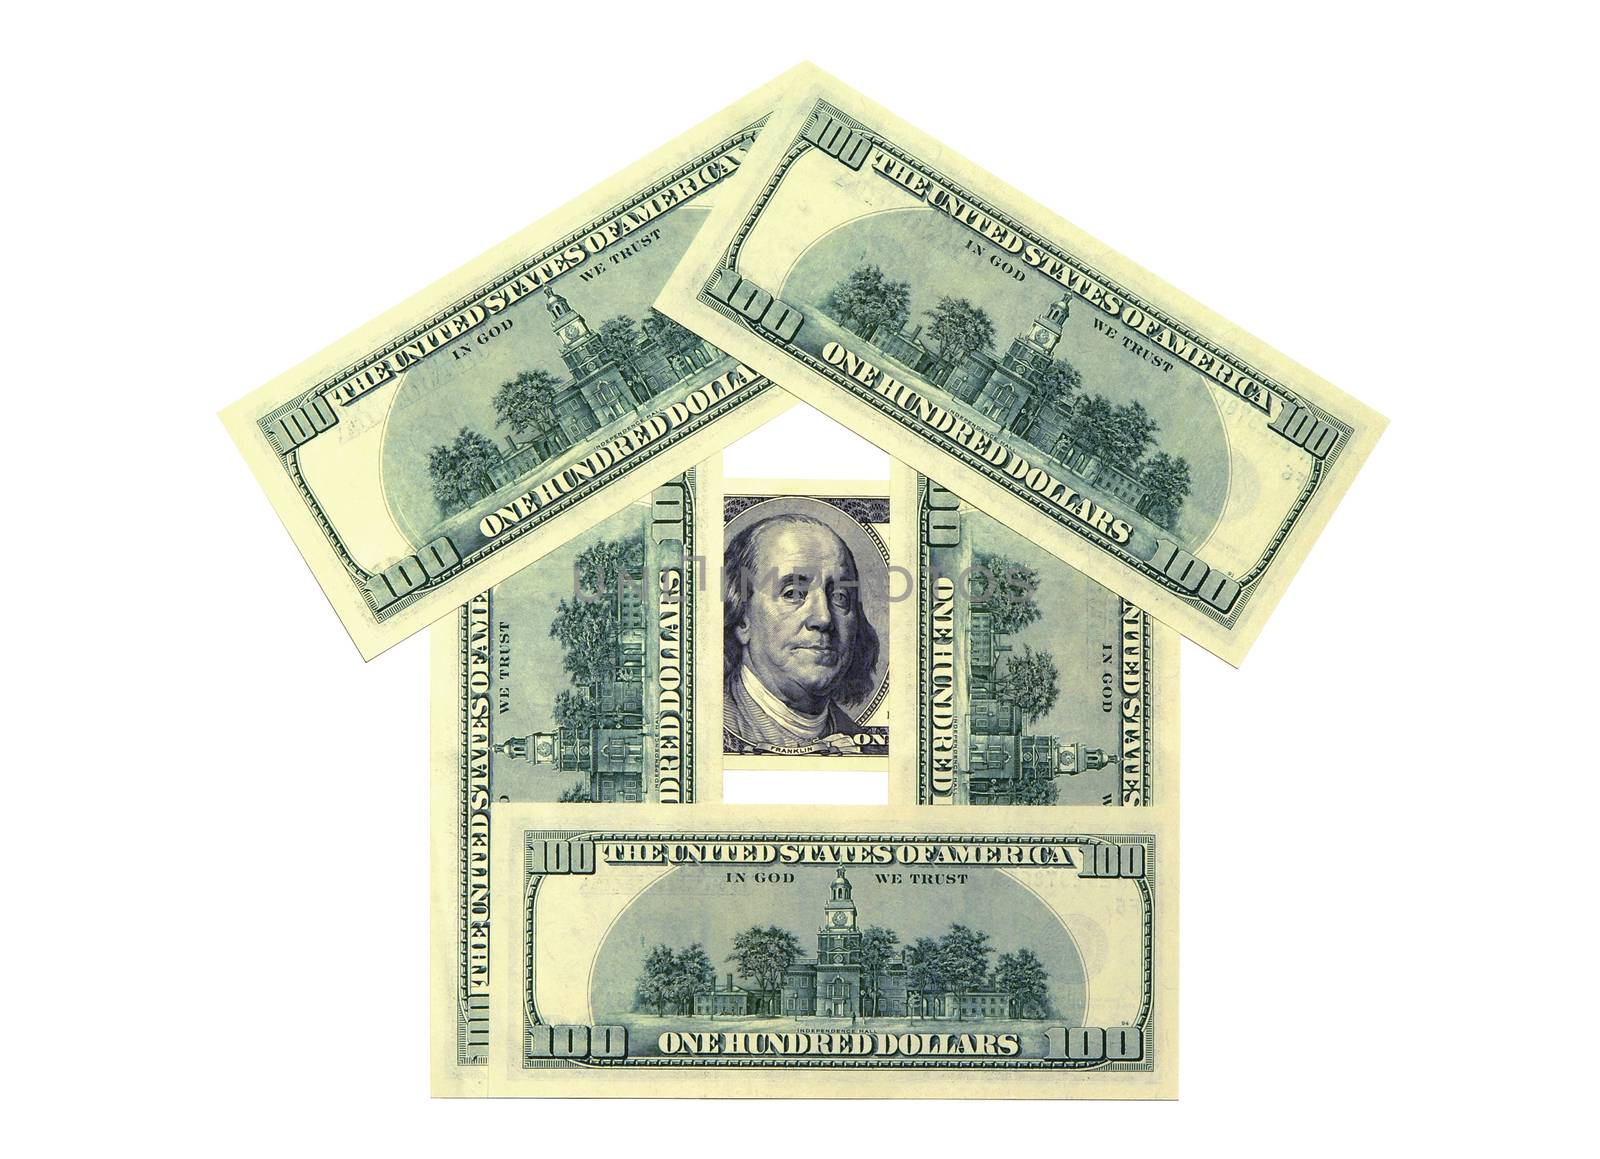 Money in the form of a small house. Denominations on hundred dollars are used.